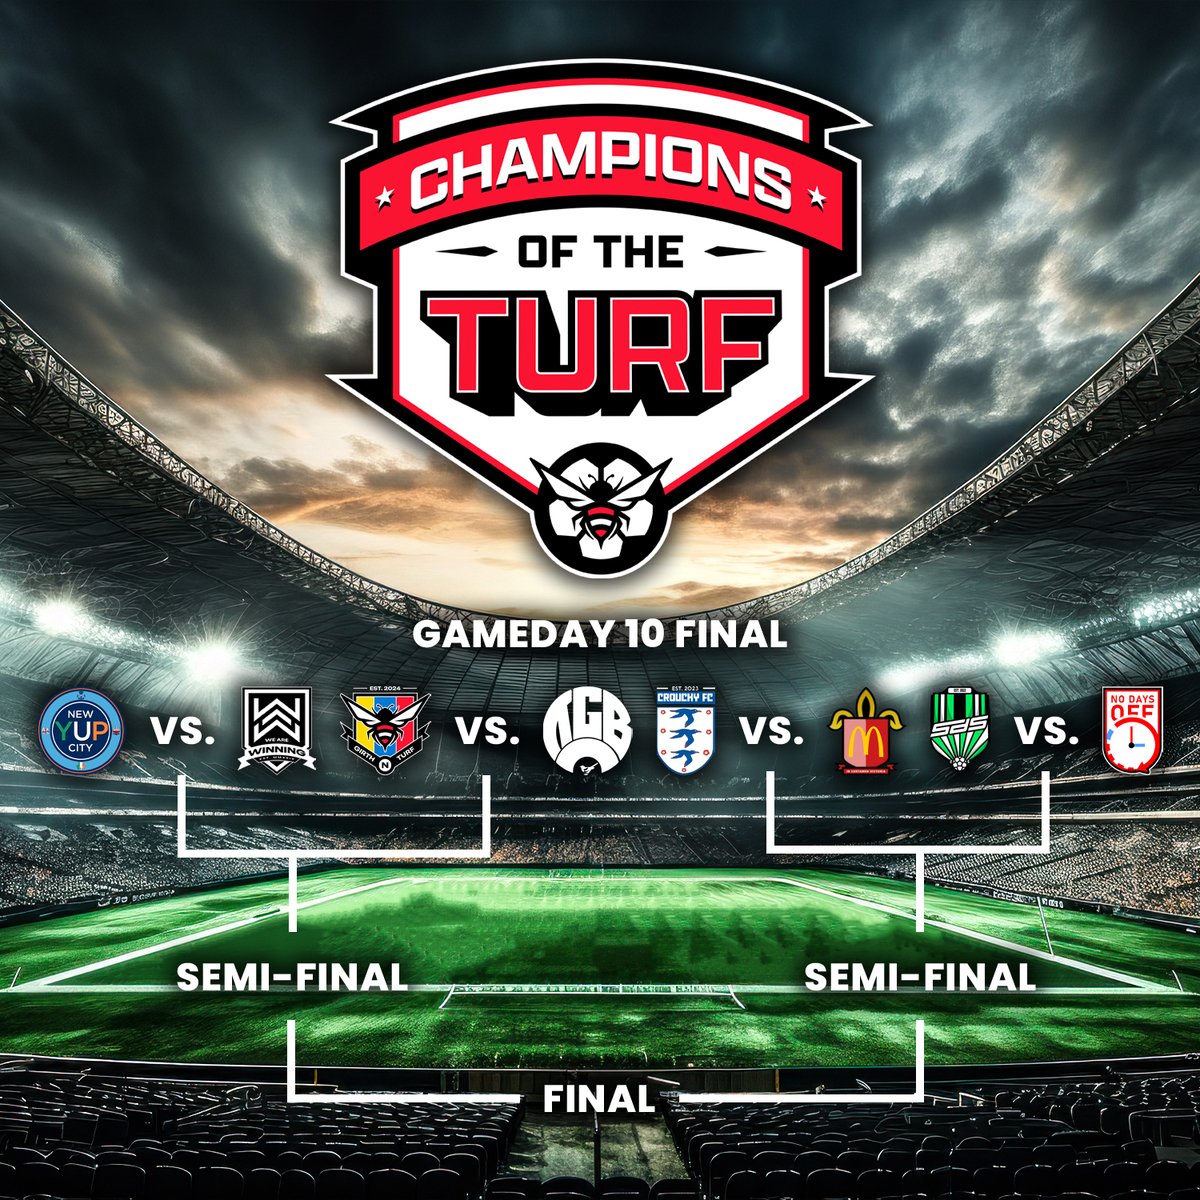 🚨 CHAMPIONS OF THE TURF 🚨

The final week is upon us and we're going NO RULES❗

@NewYUPCityFC vs. @WAW_FC 
@GNTFC_Official vs. @TheGeordieBoys_ 
@PeoplesPundit00 vs. @TakeawayAFC 
@SDSFootballClub vs. @NoDaysOffFC 

#GirthNTurf